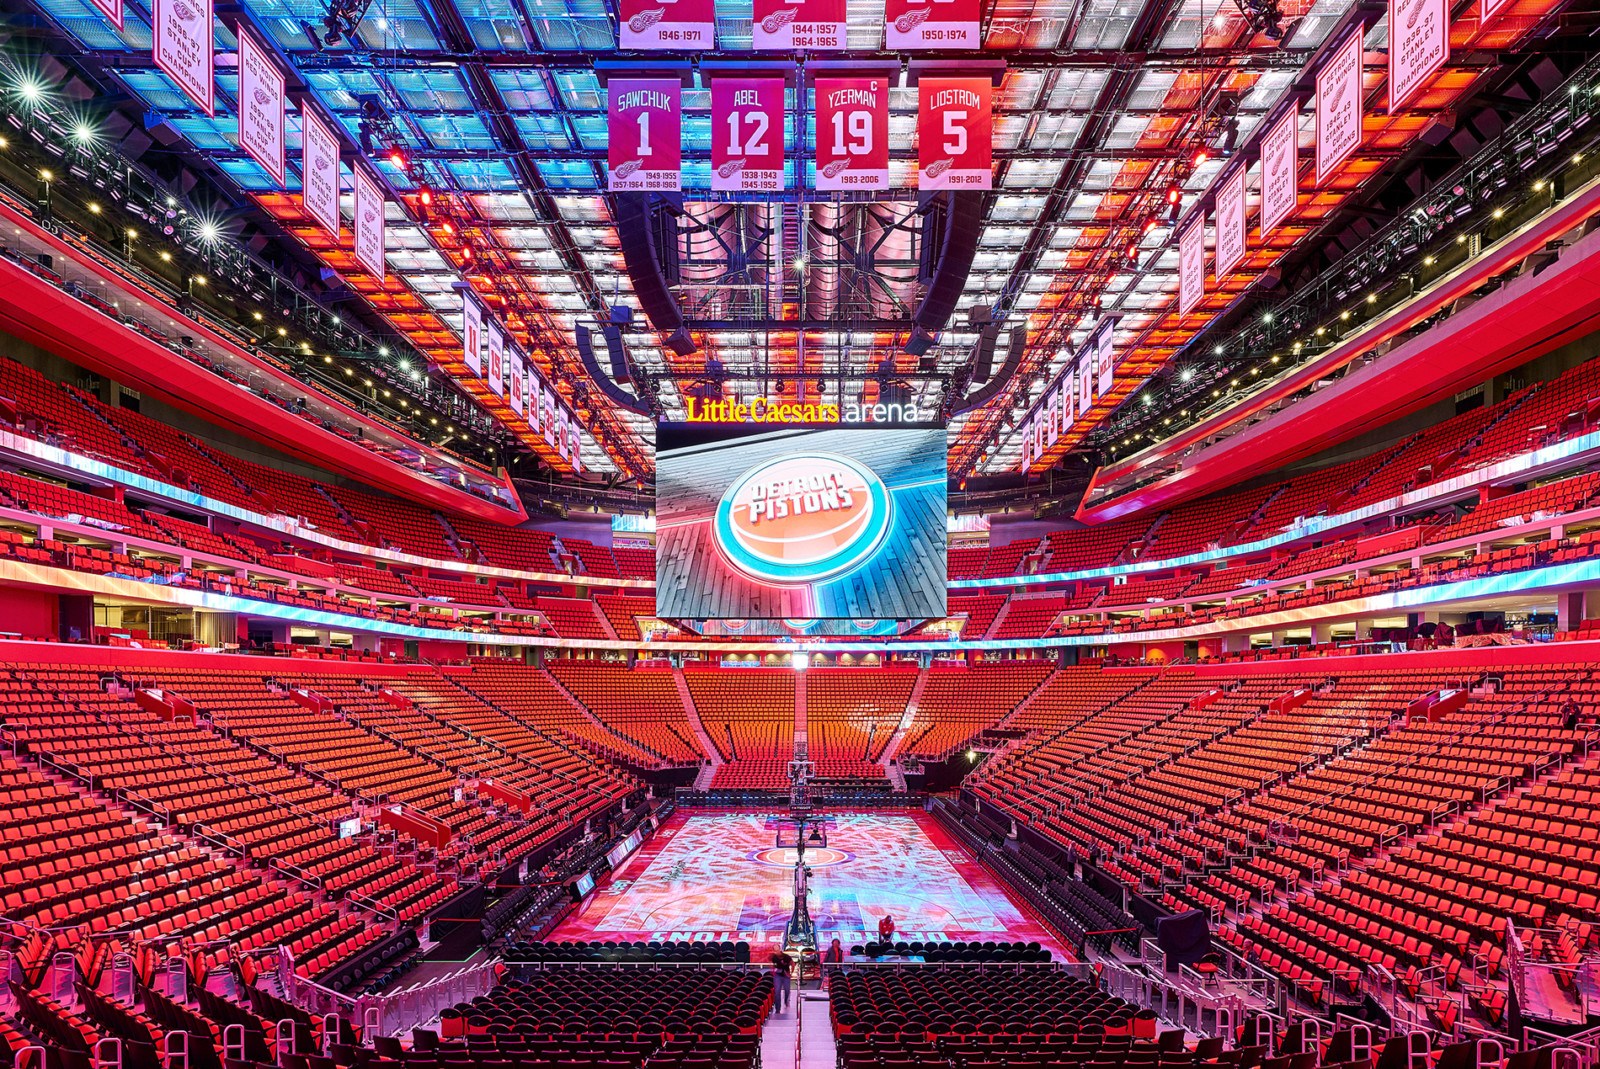 Inside look at Red Wings new Little Caesar's Arena - Sports